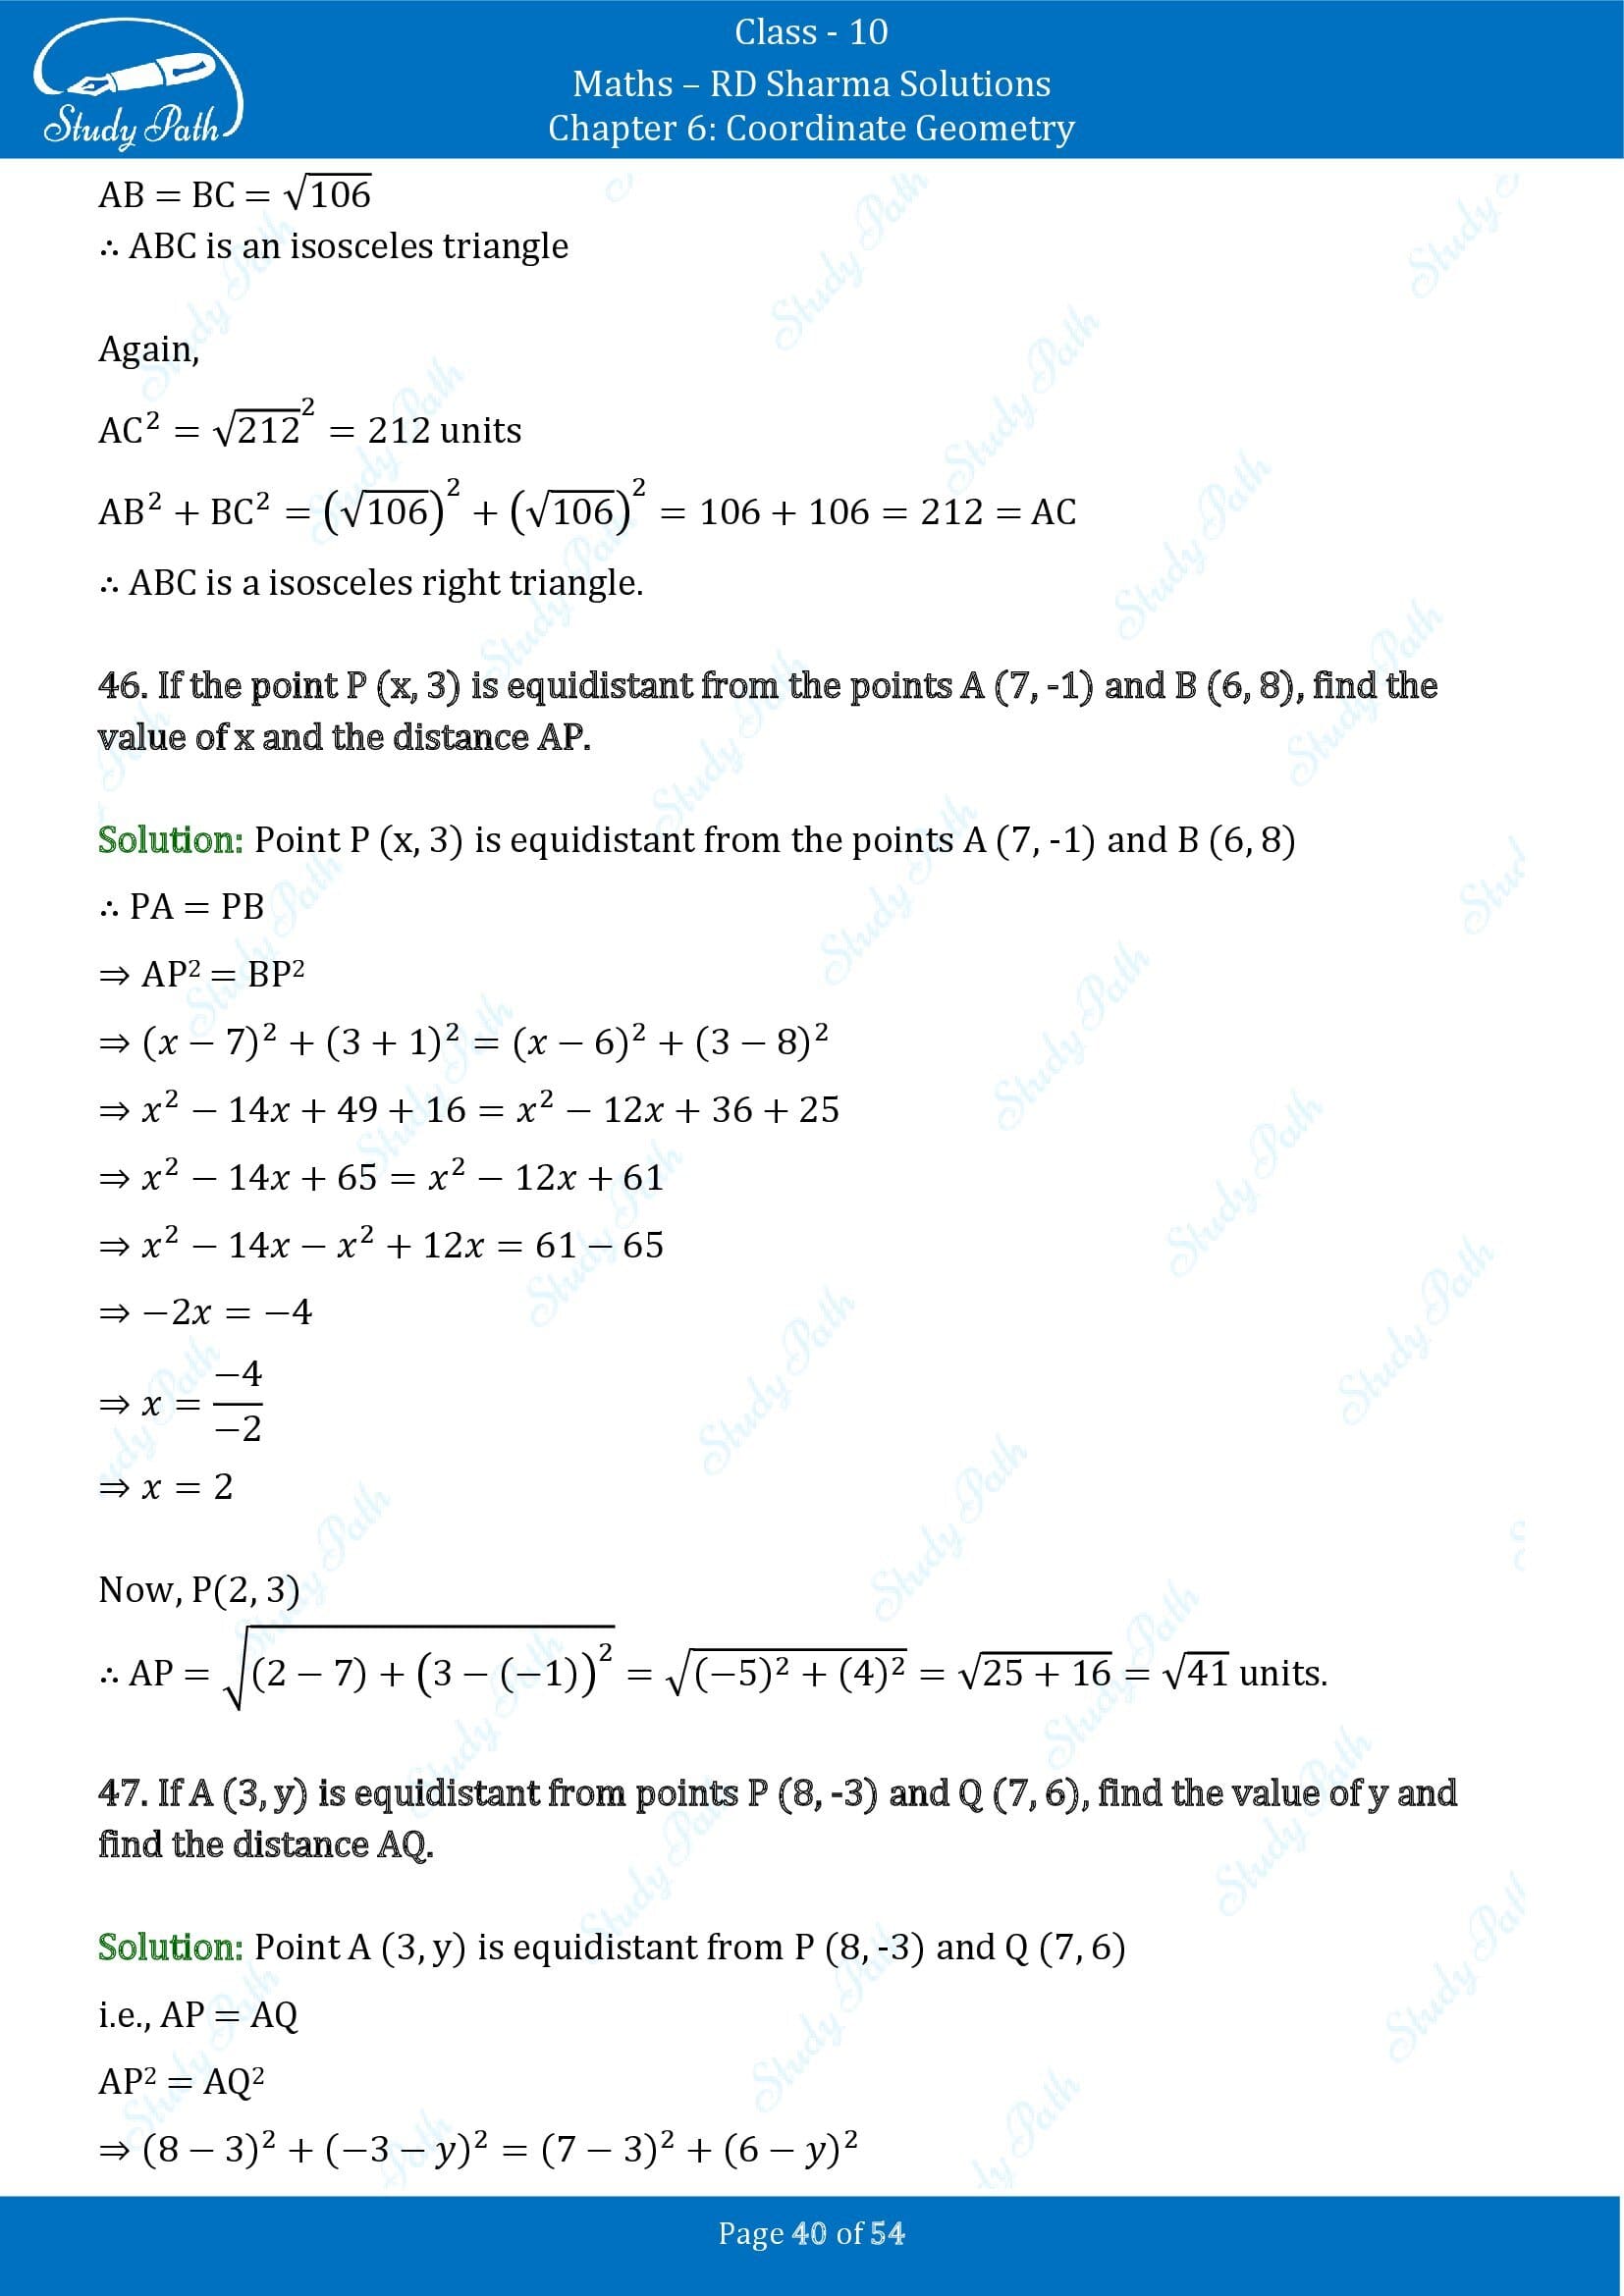 RD Sharma Solutions Class 10 Chapter 6 Coordinate Geometry Exercise 6.2 0040